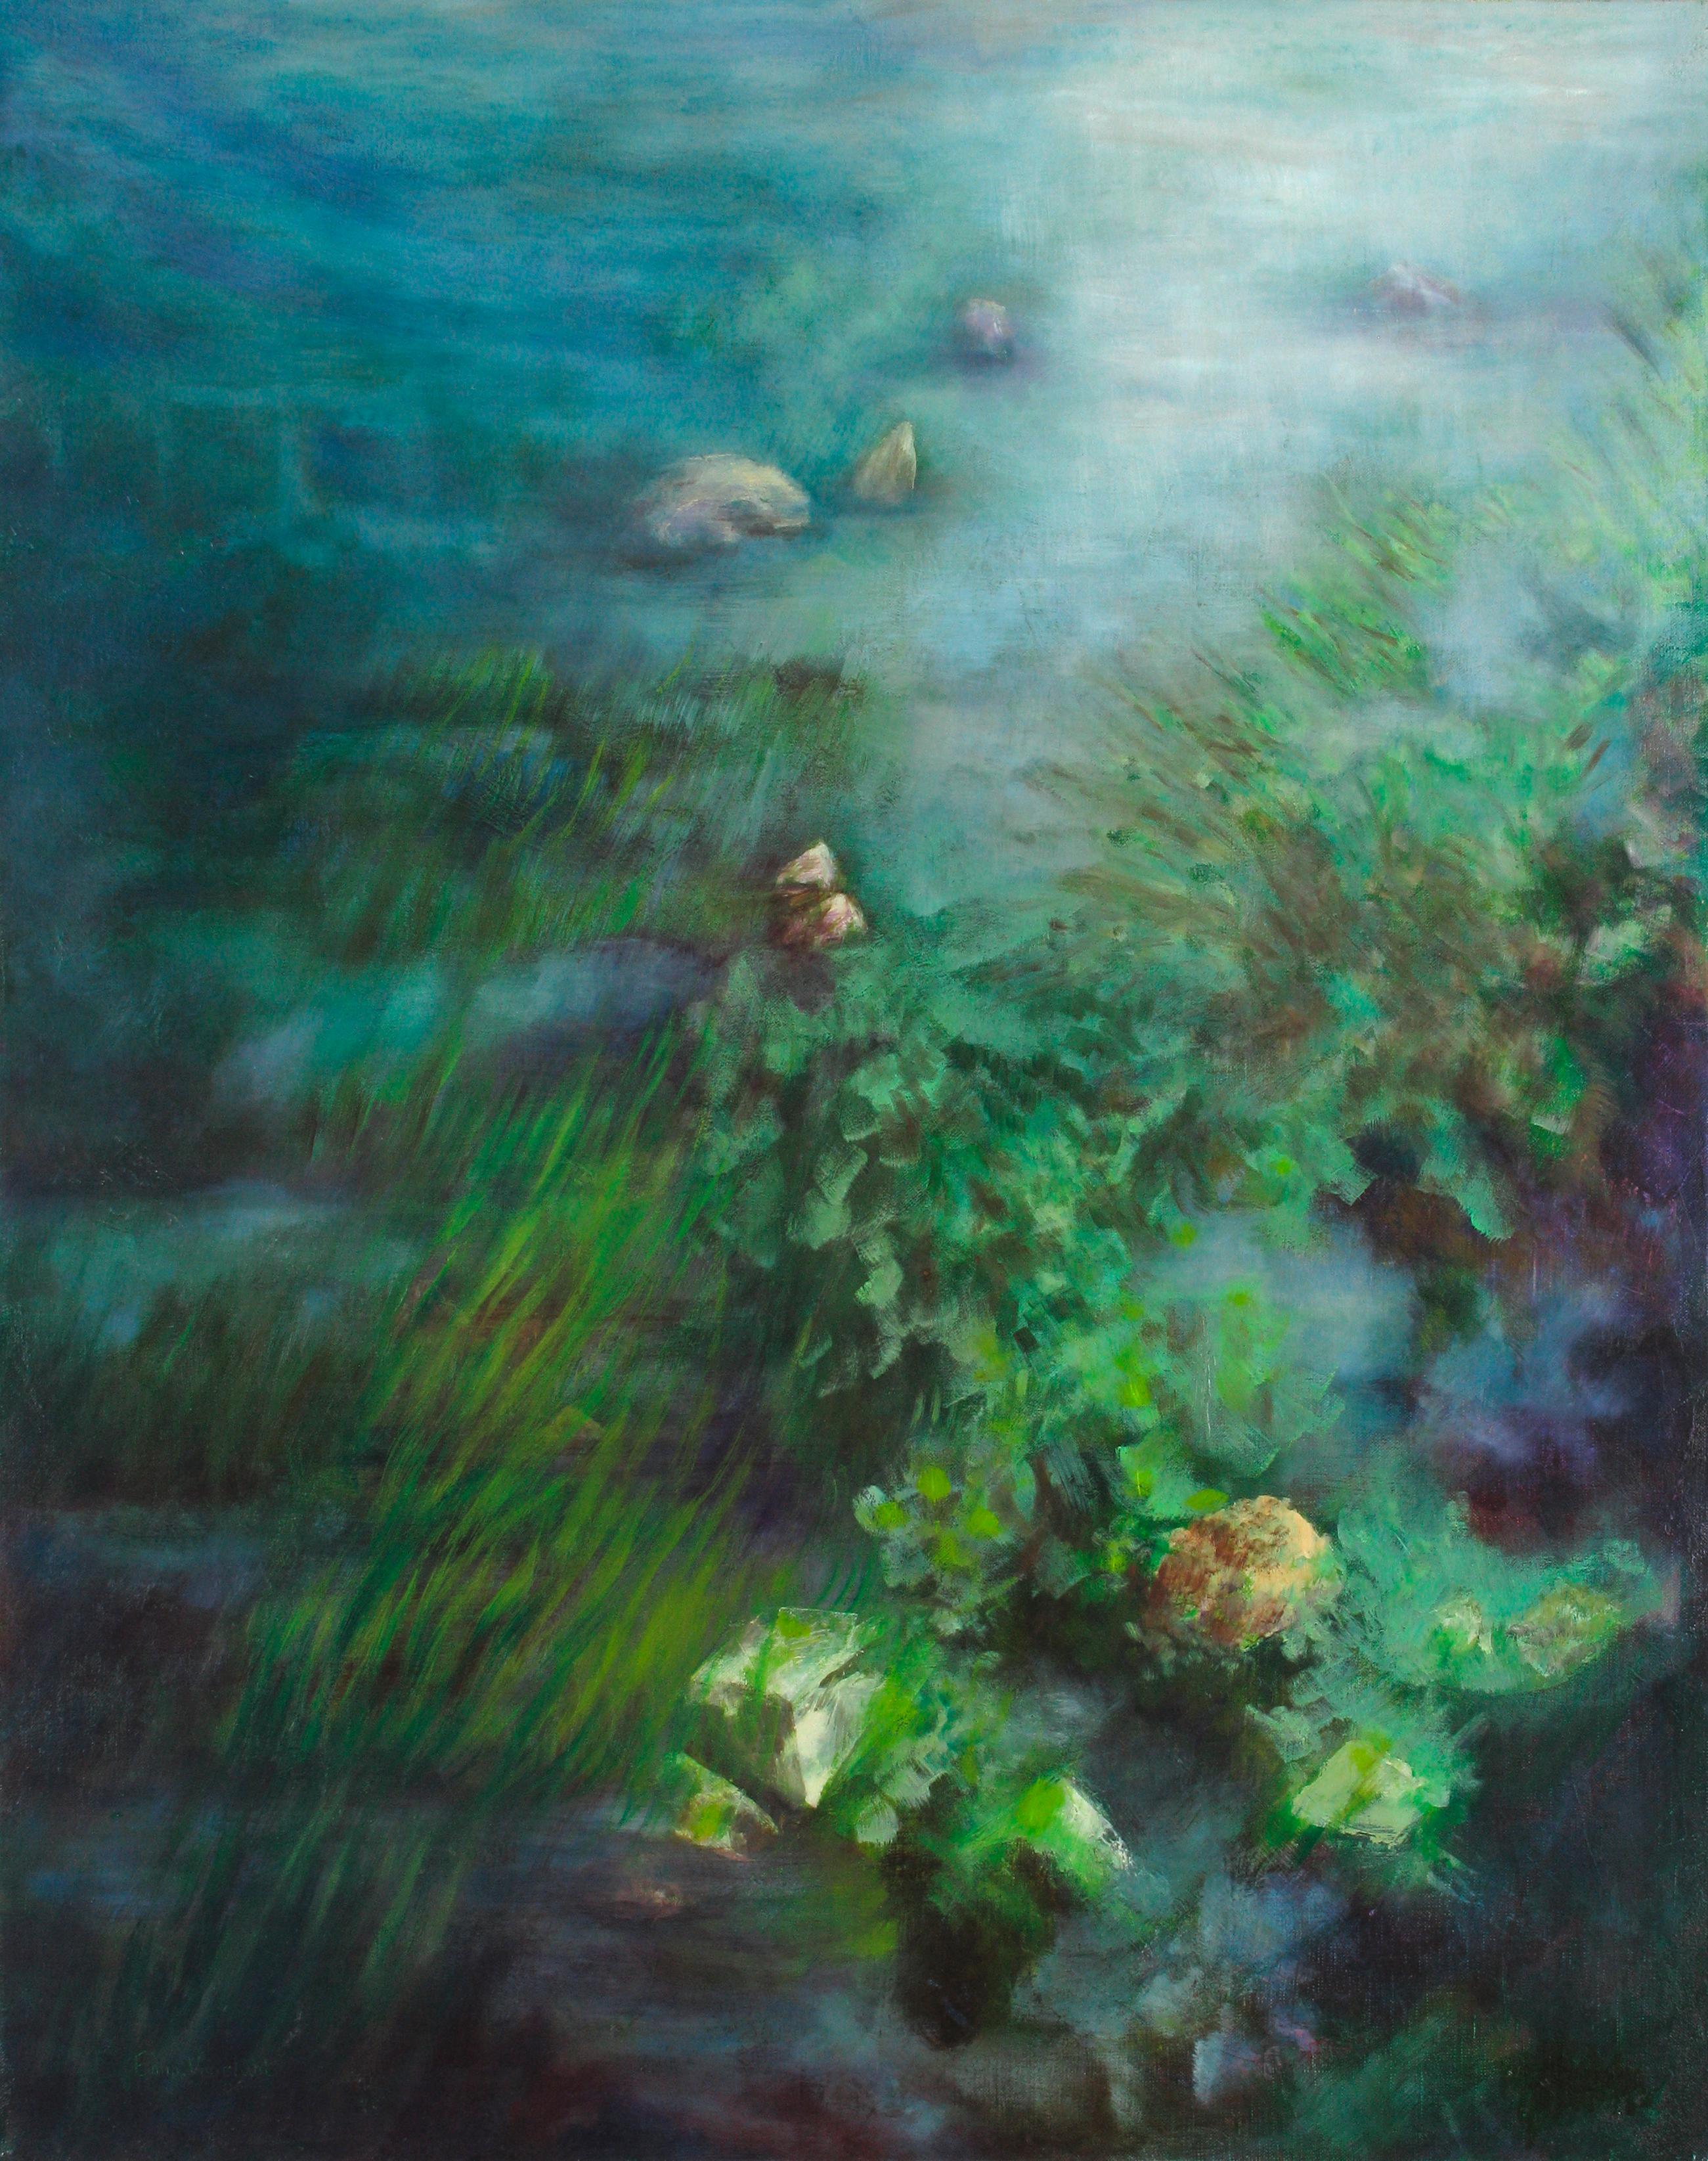  "Soothing" marine paint oil 92x72cm 2008 Emmanuelle Vroelant
The algae flowing in the transparency of the water. The sense that they’ve been there for so long....